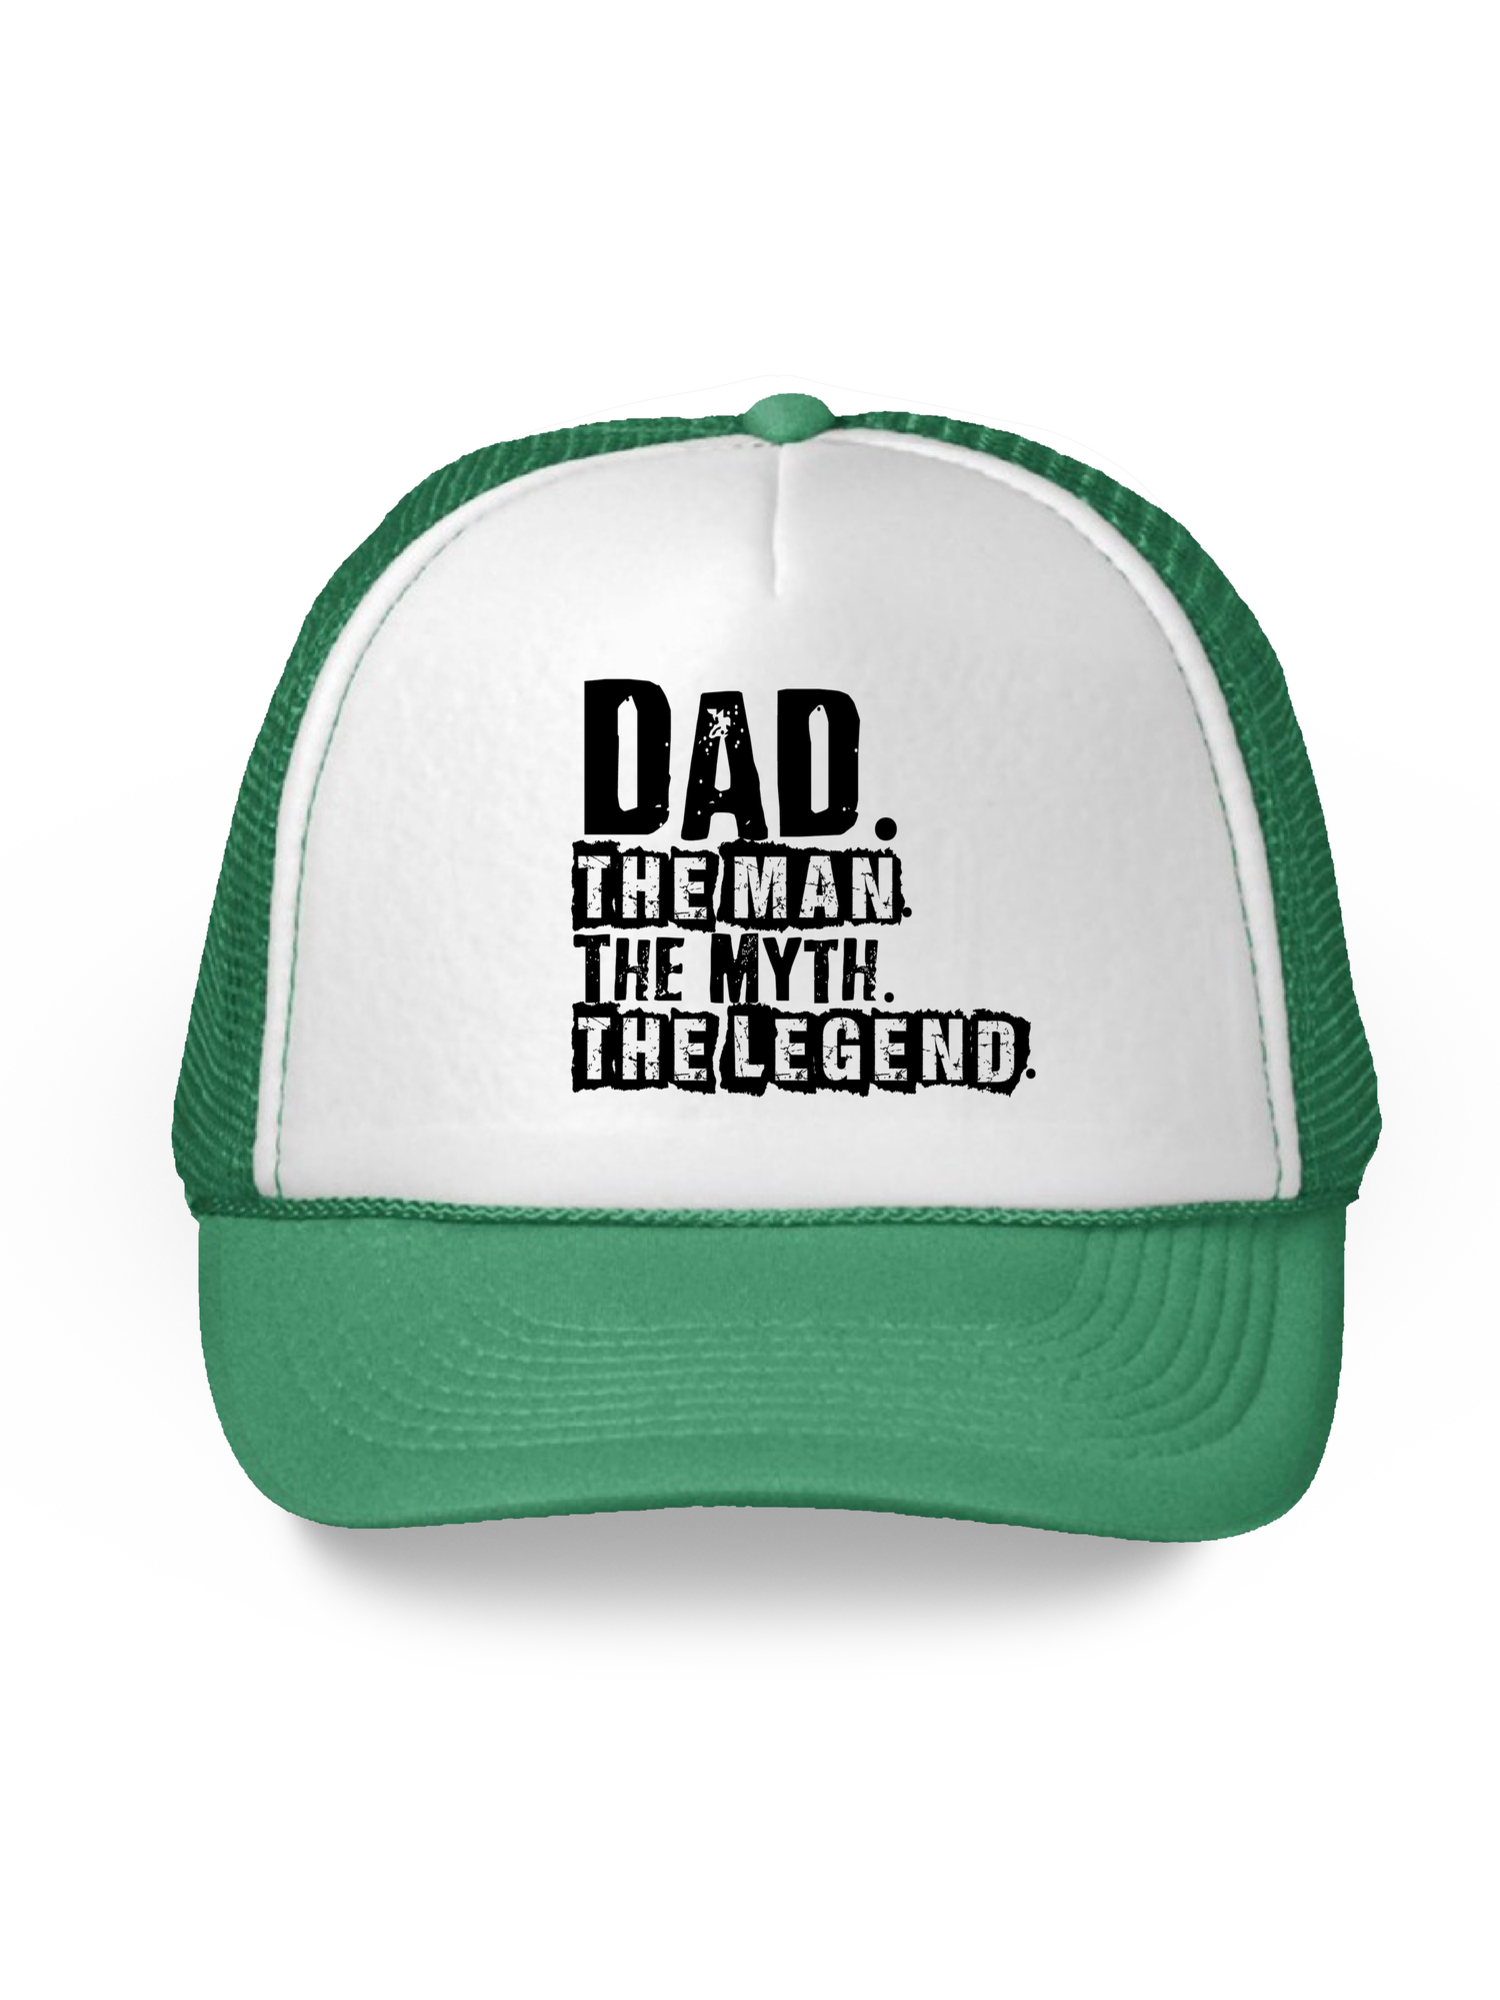 Awkward Styles Gifts for Dad Dad The Man The Myth The Legend Trucker Hat Legendary Dad Hat Funny Dad Hats with Sayings Dad The Man Snapback Hat Dad Accessories Funny Dad Gifts for Father's Day - image 1 of 6